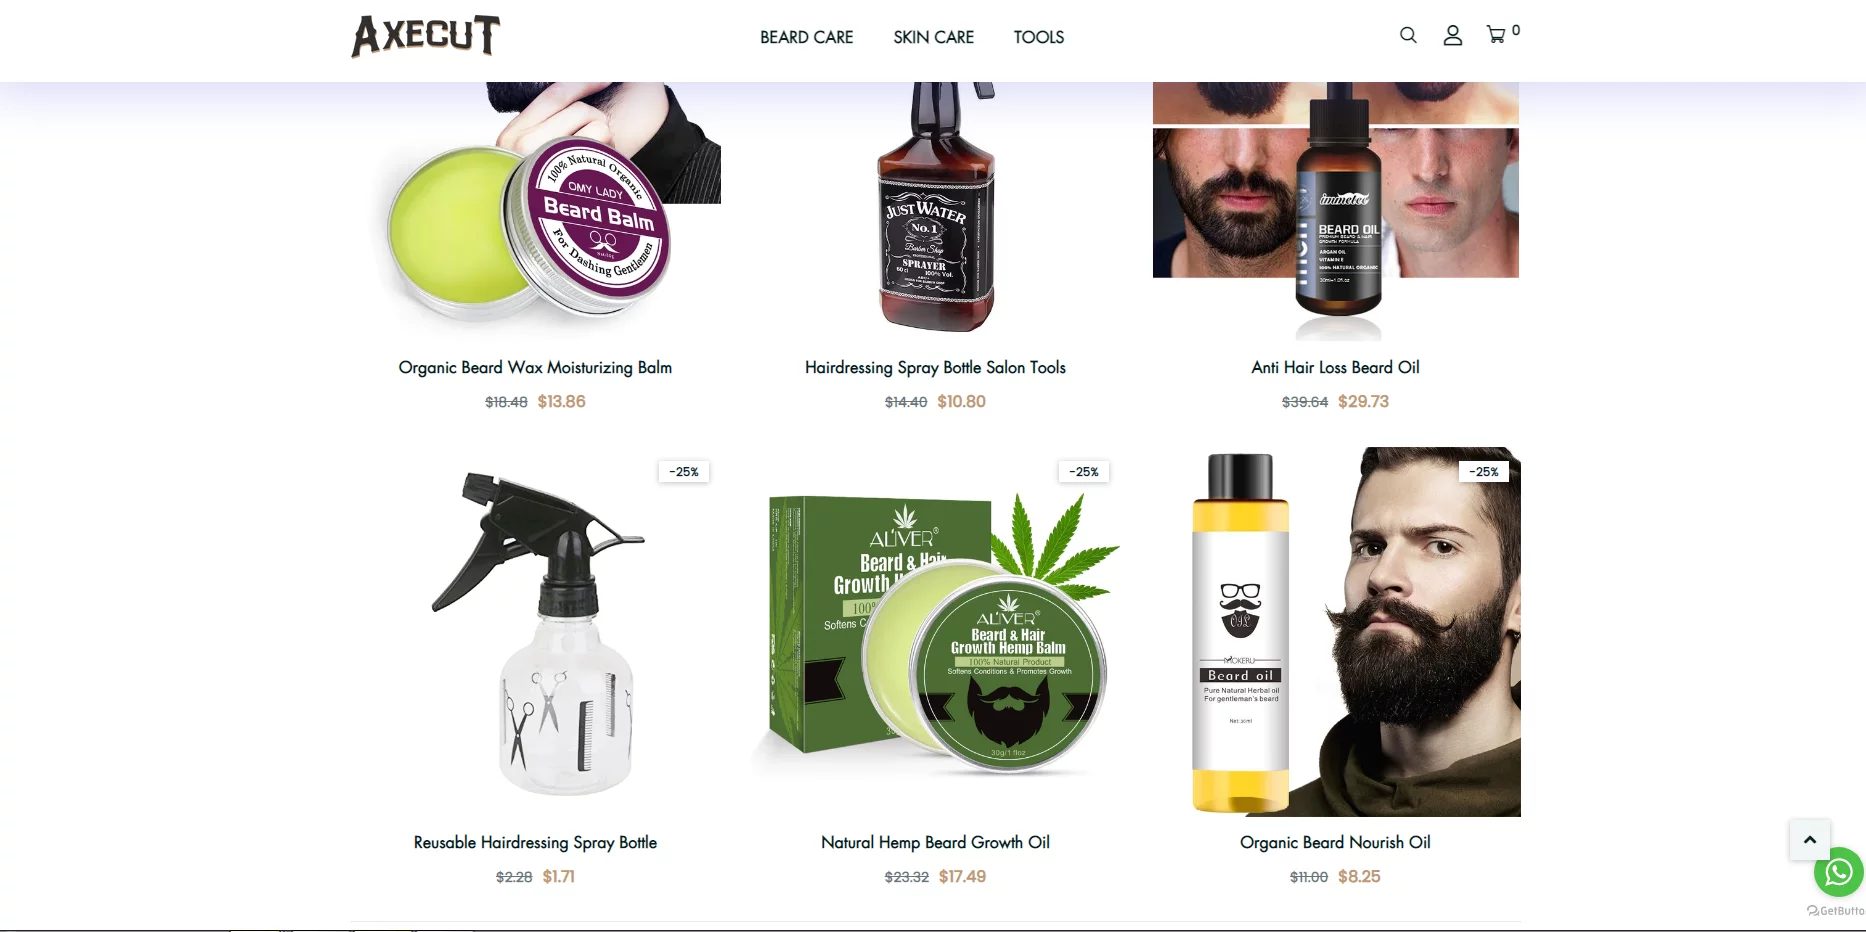 Features and Benefits of Bebiggy Prebuilt Beard Care Shopify Shops